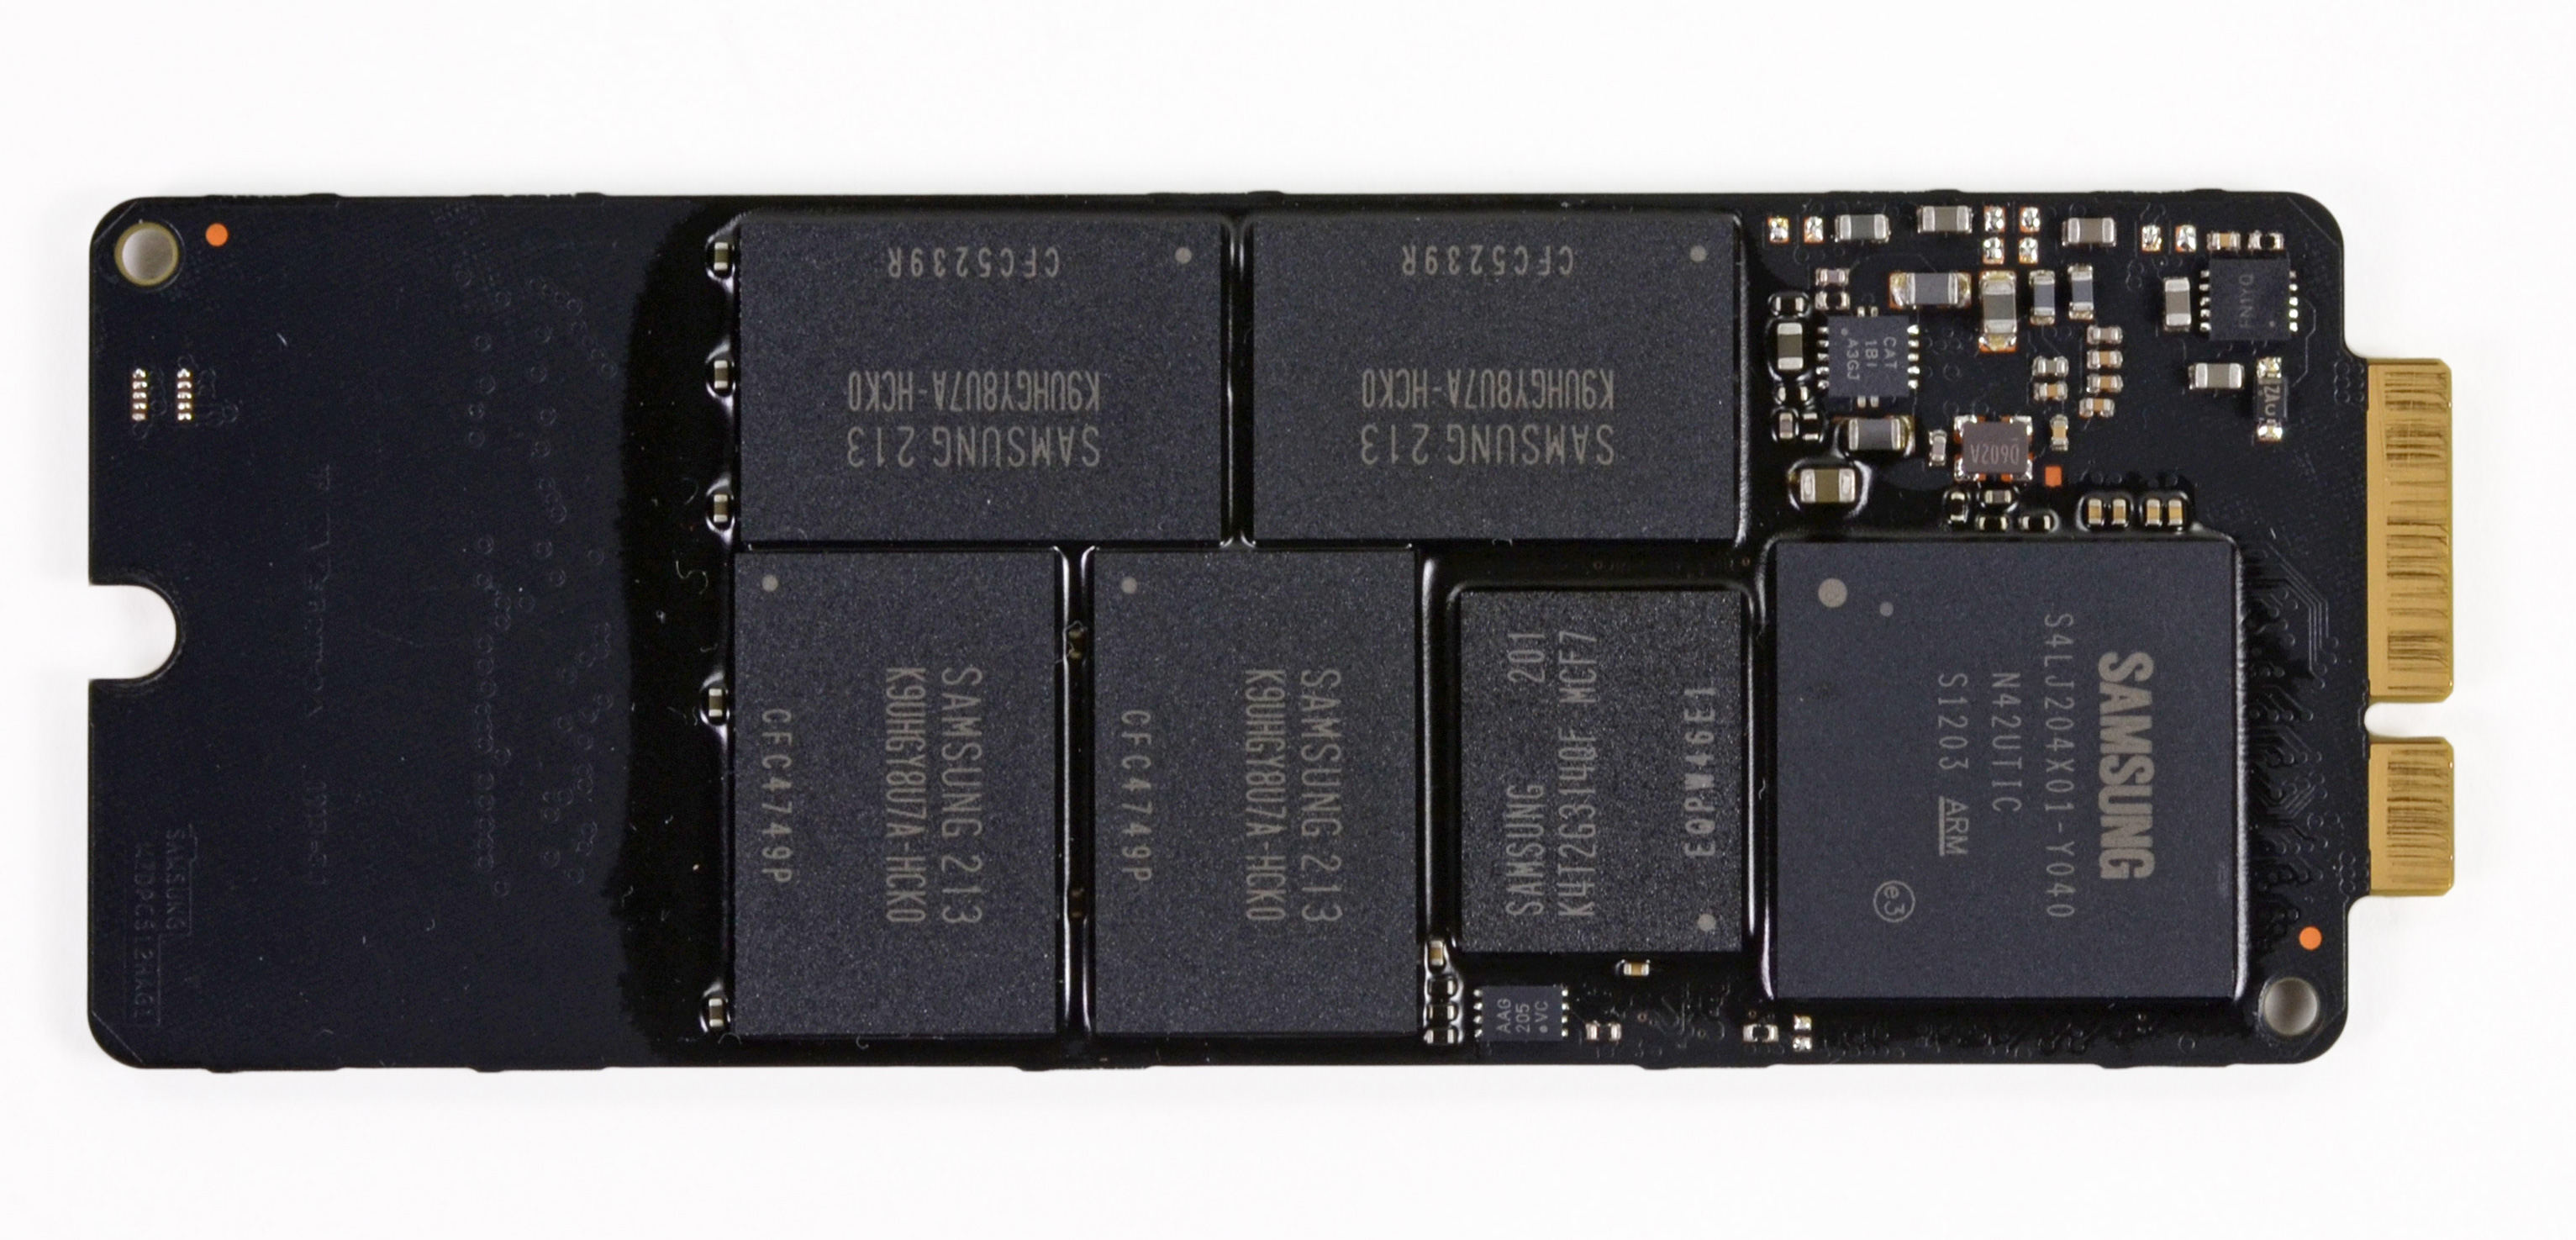 choose a samsung ssd for my mac pro